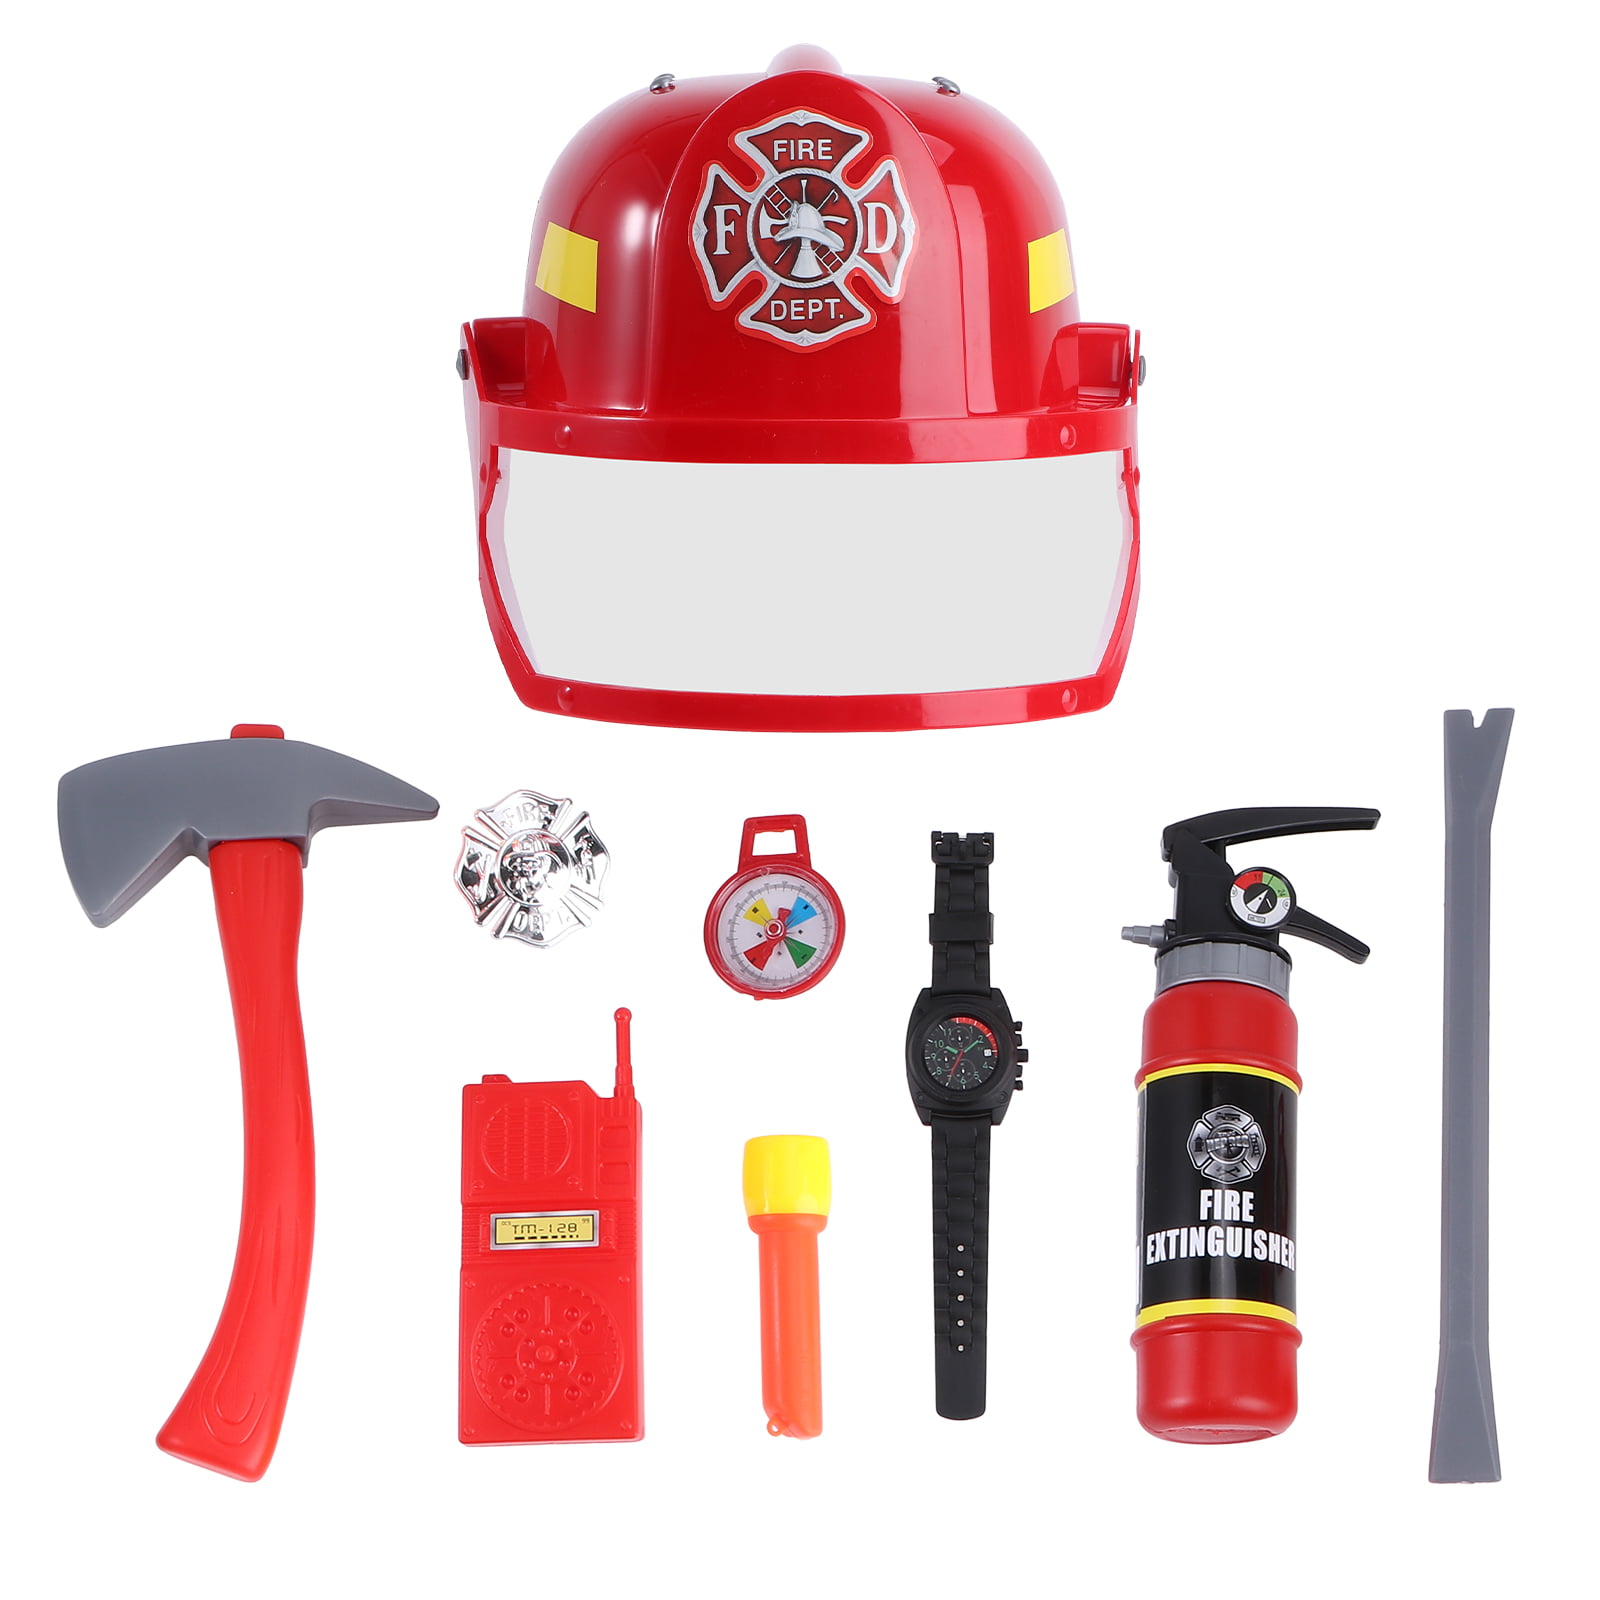 Fireman Gear Play Set for Kids With Helmet And Accessories 